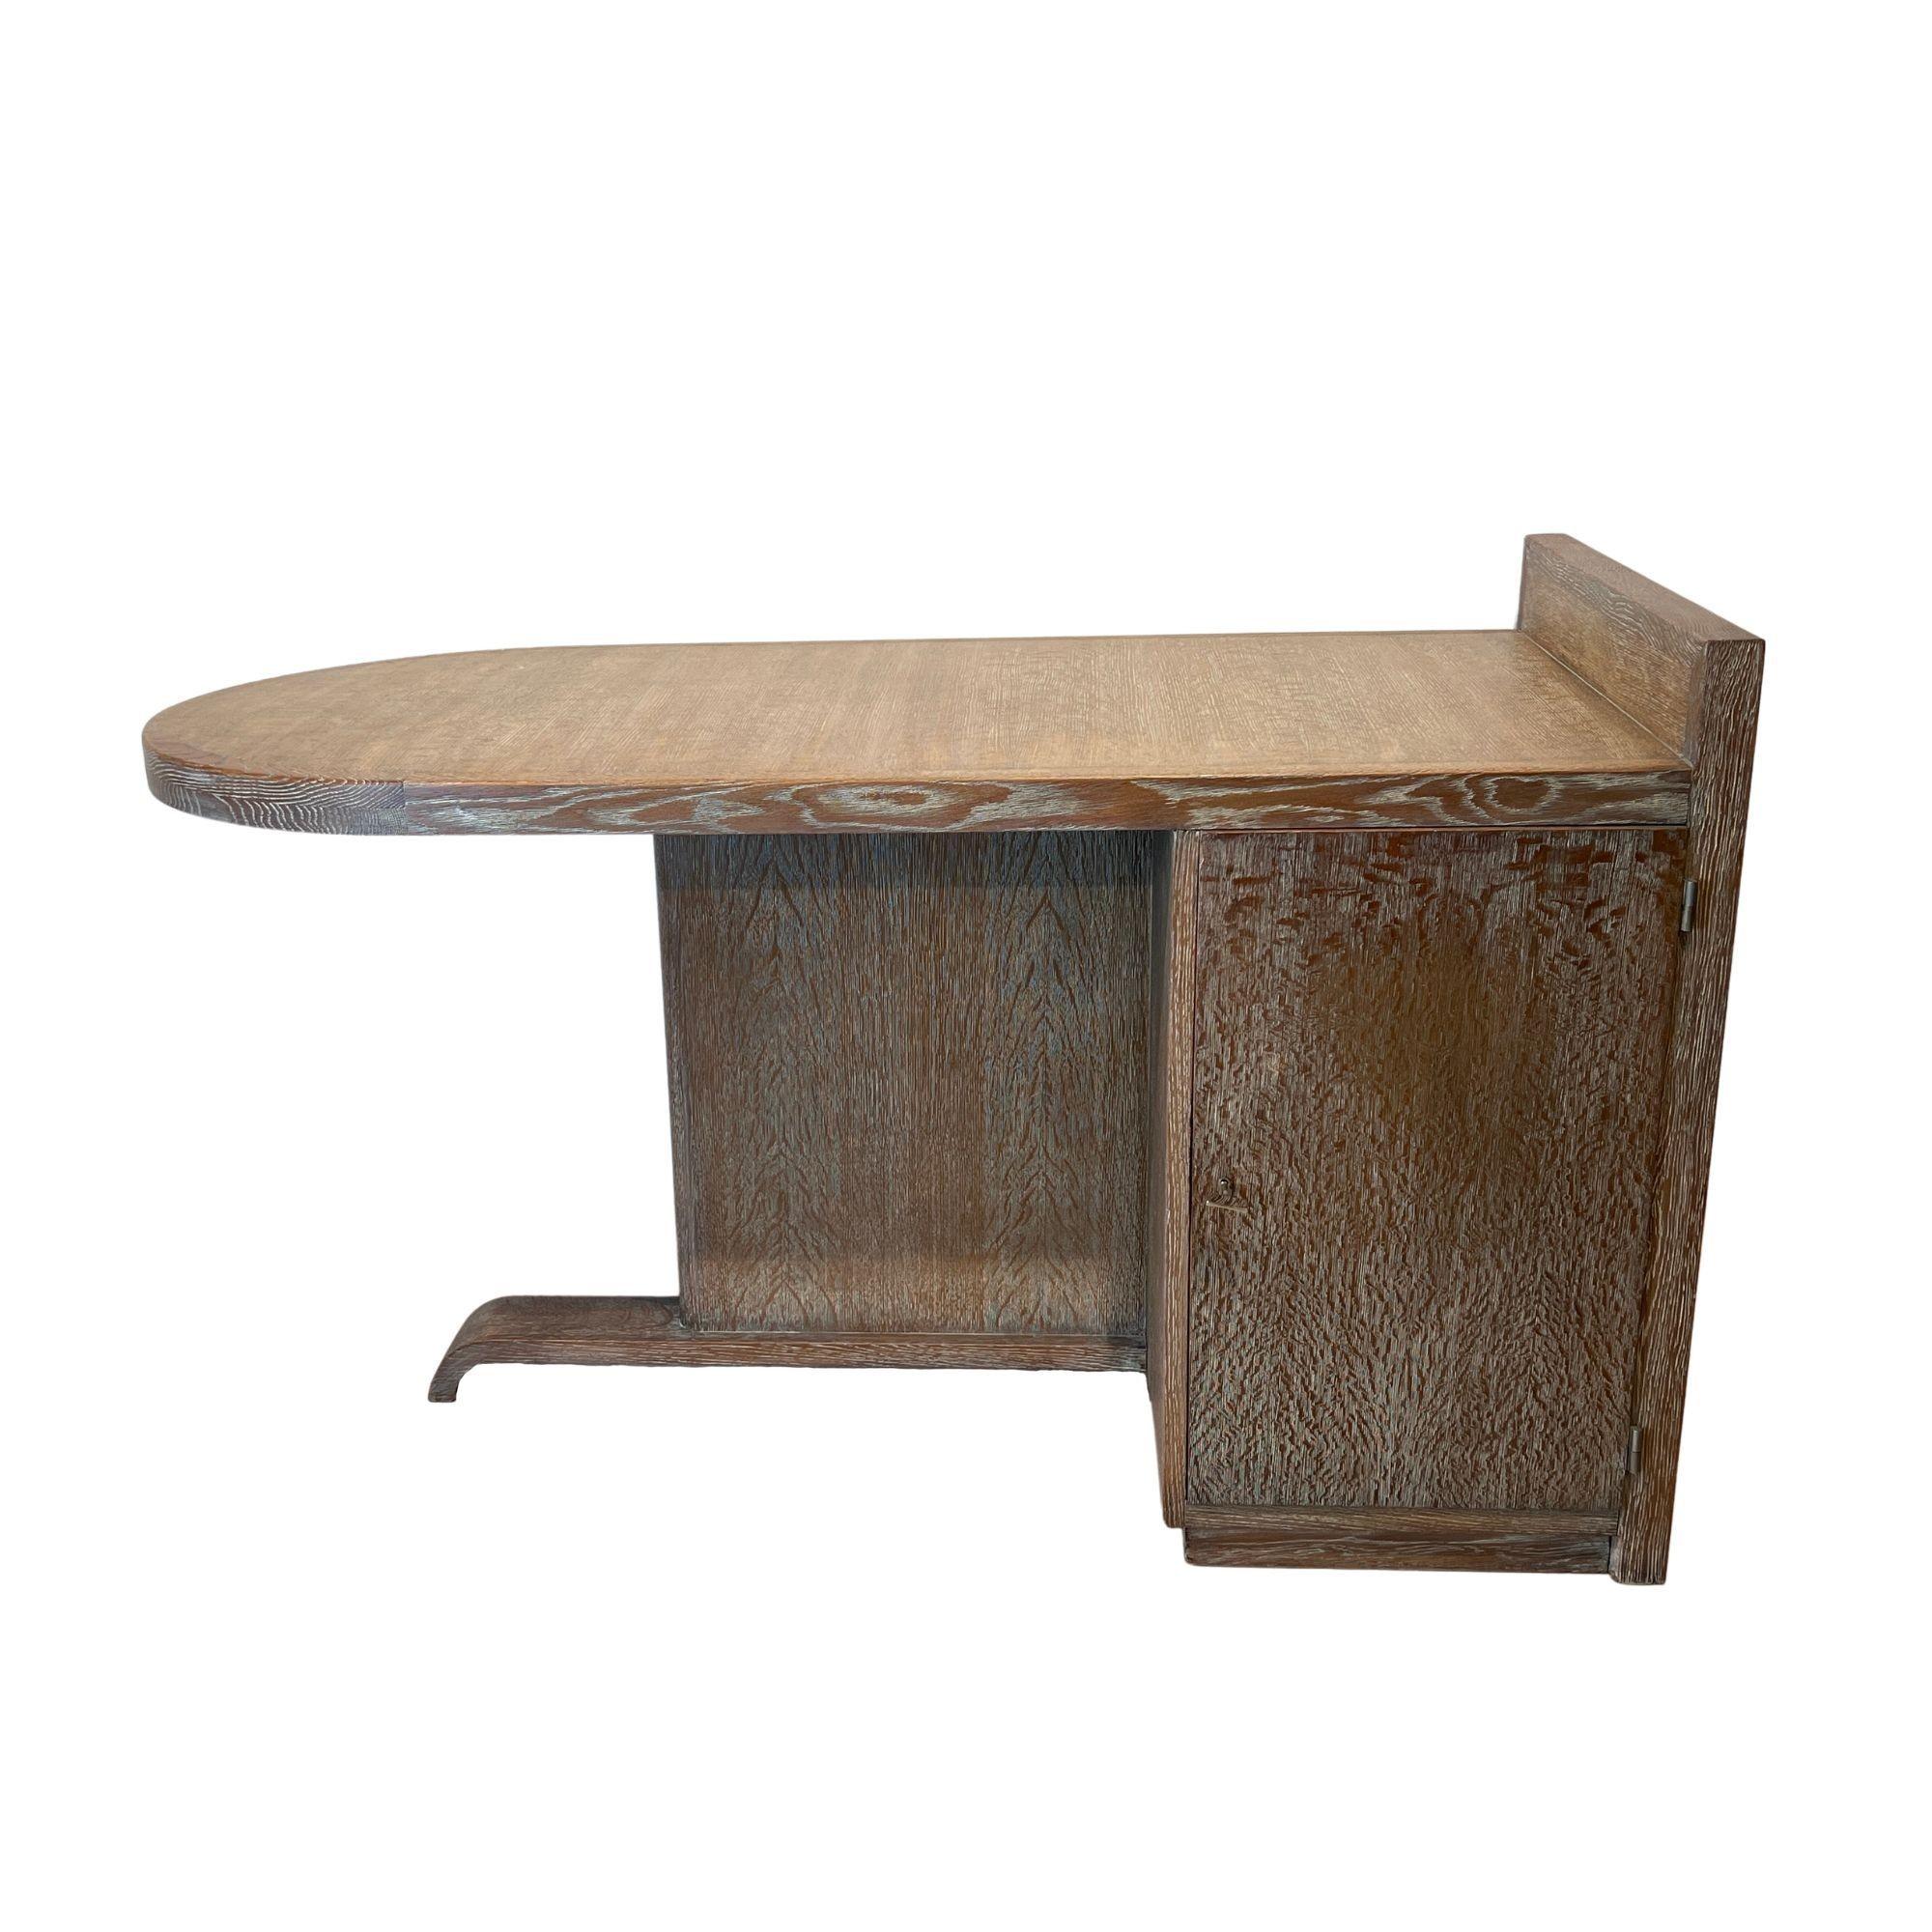 Small modernist Art Deco Desk by De Coene Frères, Belgium circa 1930/40.
Elegant asymmetrical Art Deco design, Model “Depose”. Limed oak surface. Lockable doors on both sides. Inside there are drawers at the top, underneath an oak board. Stainless